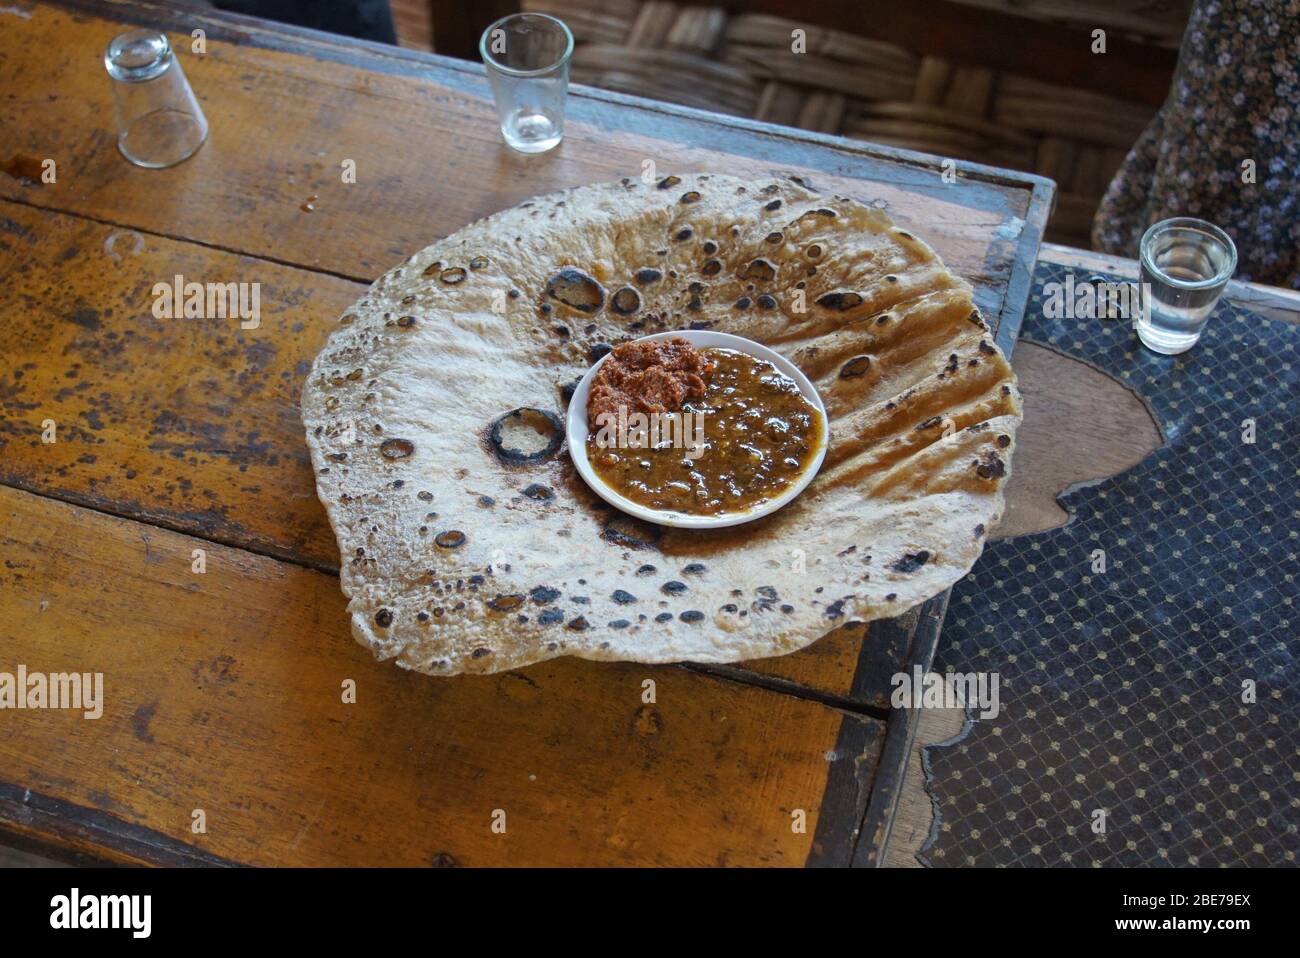 Table with freshly made Kocho Bread and Condiments Stock Photo